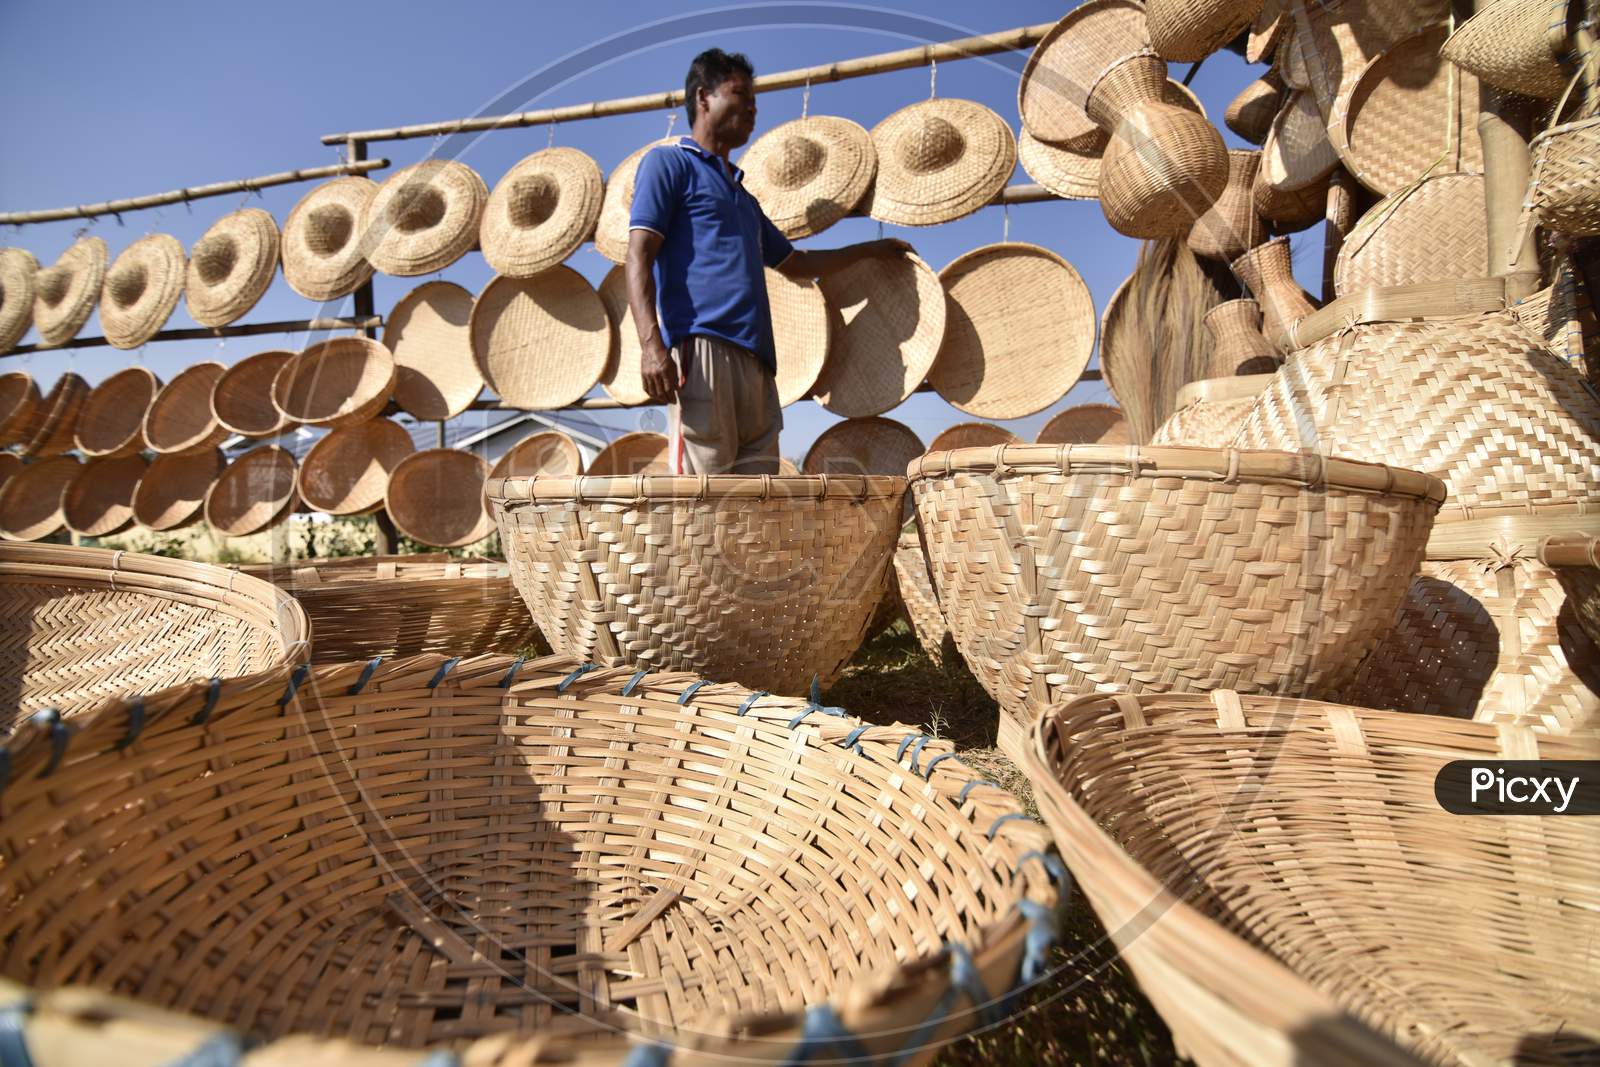 Bamboo Woven Hats And Baskets For Tea Leaf Harvesting Workers Which Is Commonly Known As Bamboo Crafts in Assam